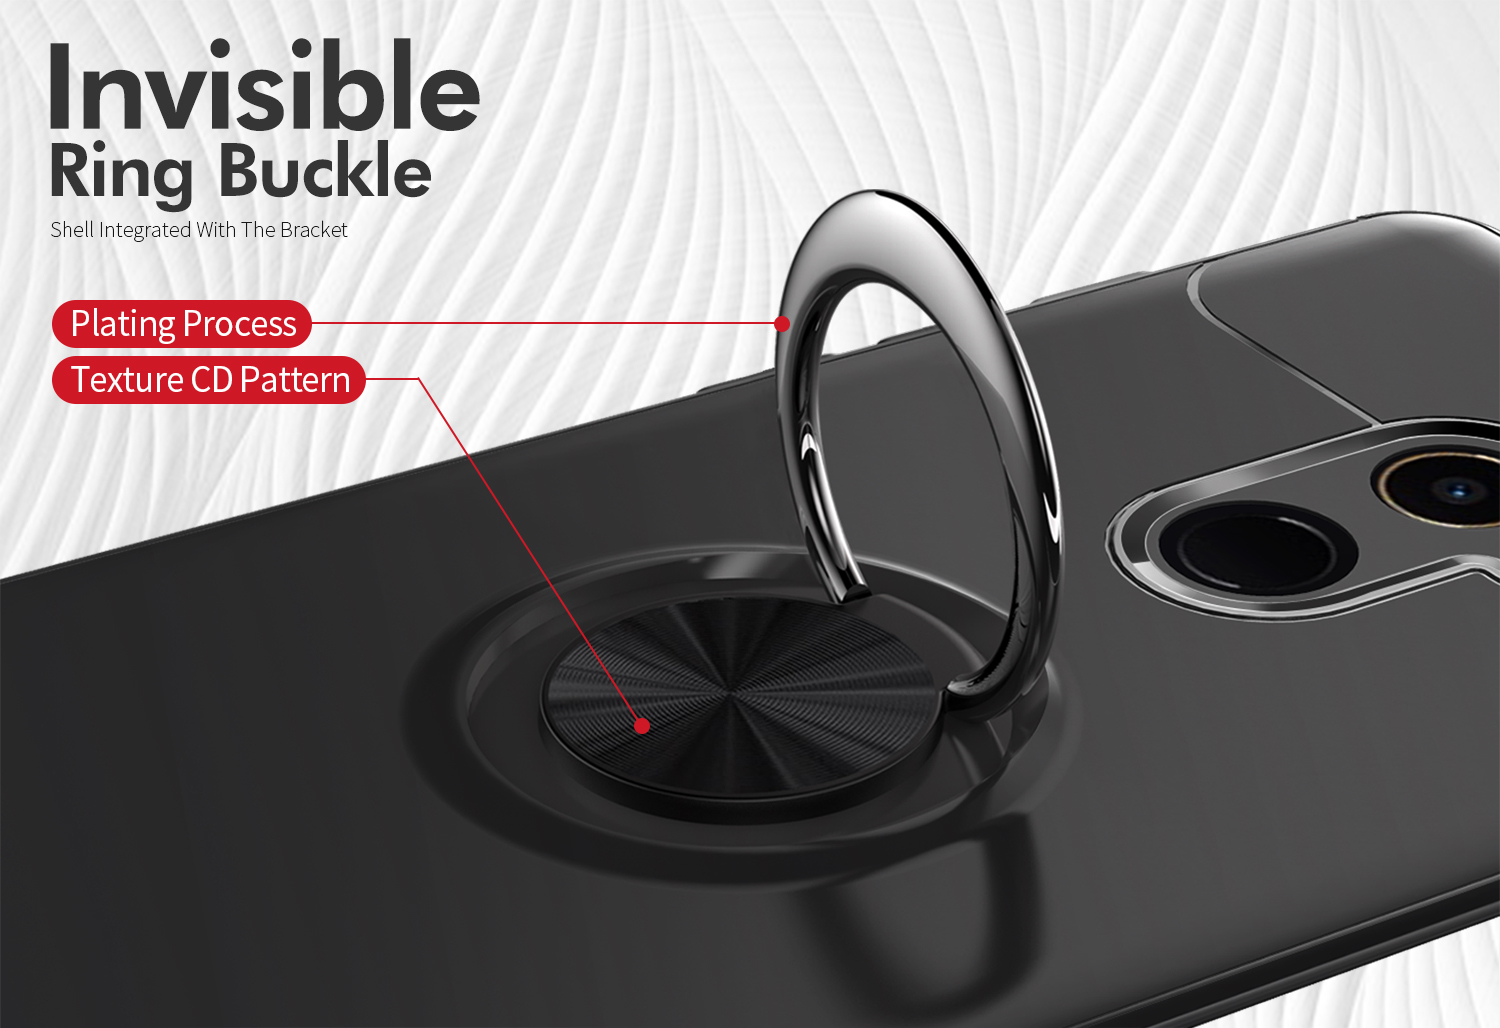 Bakeey-360deg-Adjustable-Metal-Ring-Kickstand-Magnetic-PC-Protective-Case-for-Xiaomi-Mi-MIX-2-Non-or-1300924-5